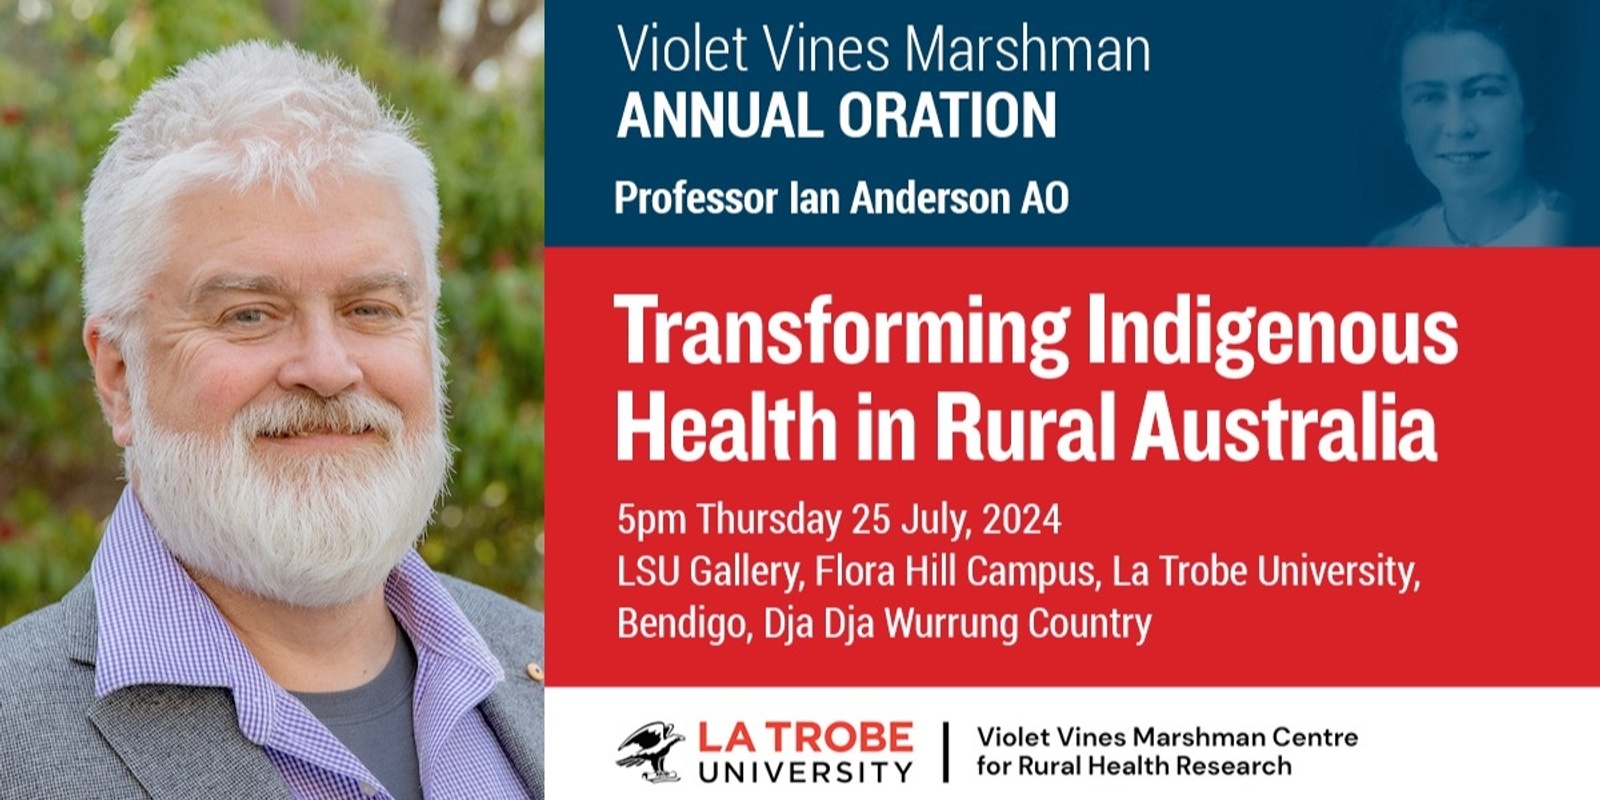 Banner image for 'Transforming Indigenous Health in Rural Australia' with Professor Ian Anderson AO - Violet Vines Marshman Annual Oration